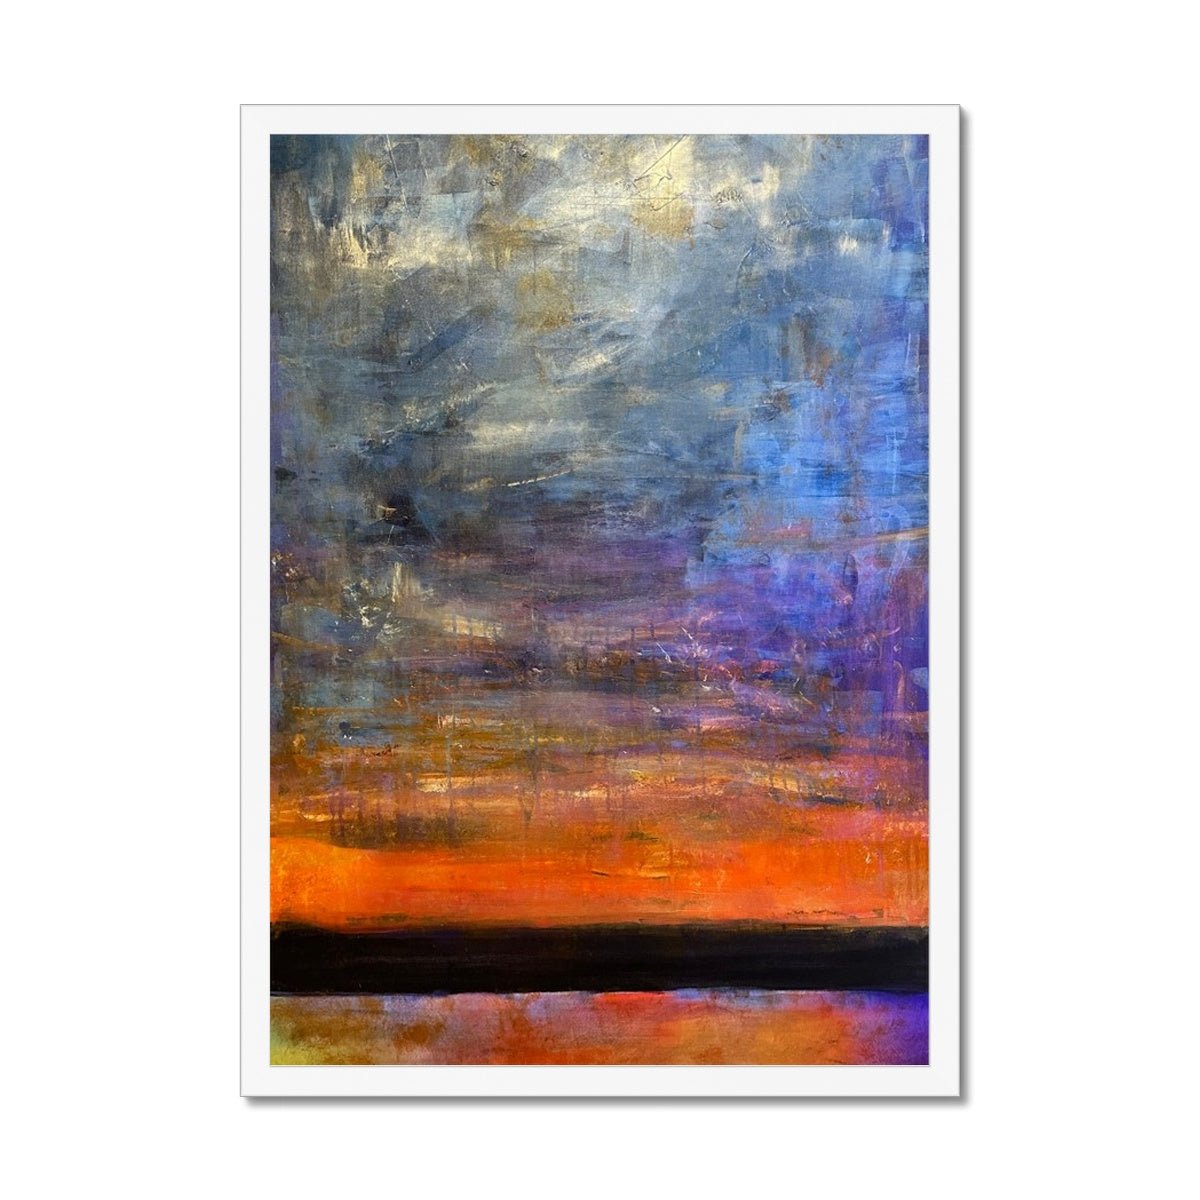 Horizon Dreams Abstract Painting | Framed Prints From Scotland-Framed Prints-Abstract & Impressionistic Art Gallery-A2 Portrait-White Frame-Paintings, Prints, Homeware, Art Gifts From Scotland By Scottish Artist Kevin Hunter